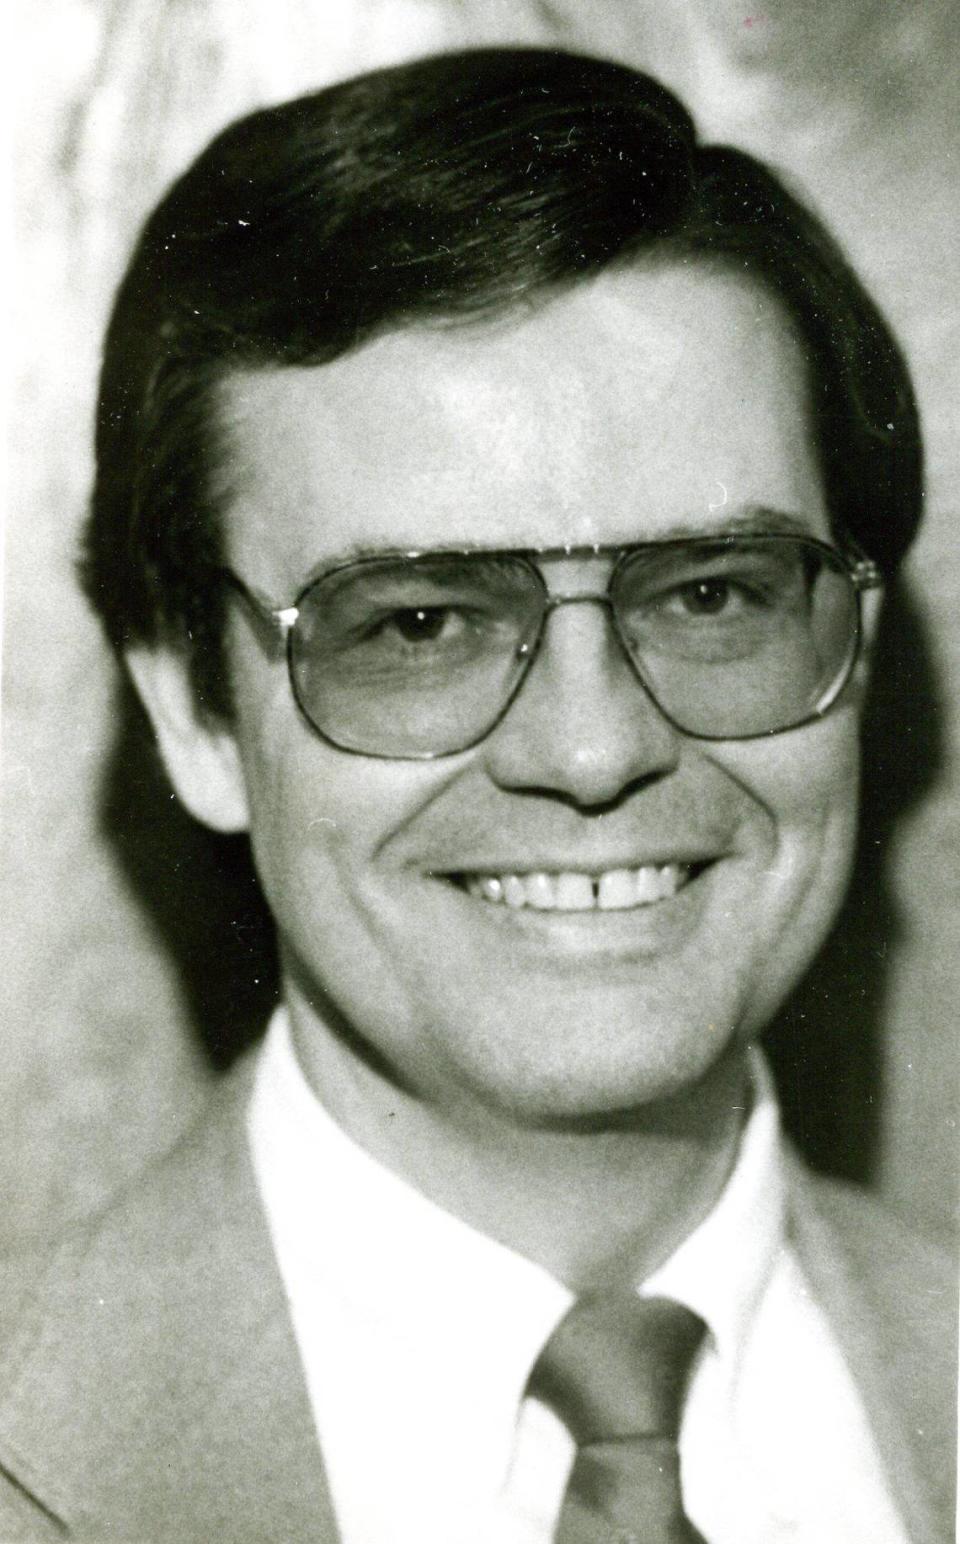 Steve Martin was first appointed to the Paso Robles City Council in 1987 and later elected to that role and mayor. He was also a playwright, computer programmer, journalist and marketing manager. He died on Aug. 14, 2023, and is seen here in a Jan. 24, 1992, photo.